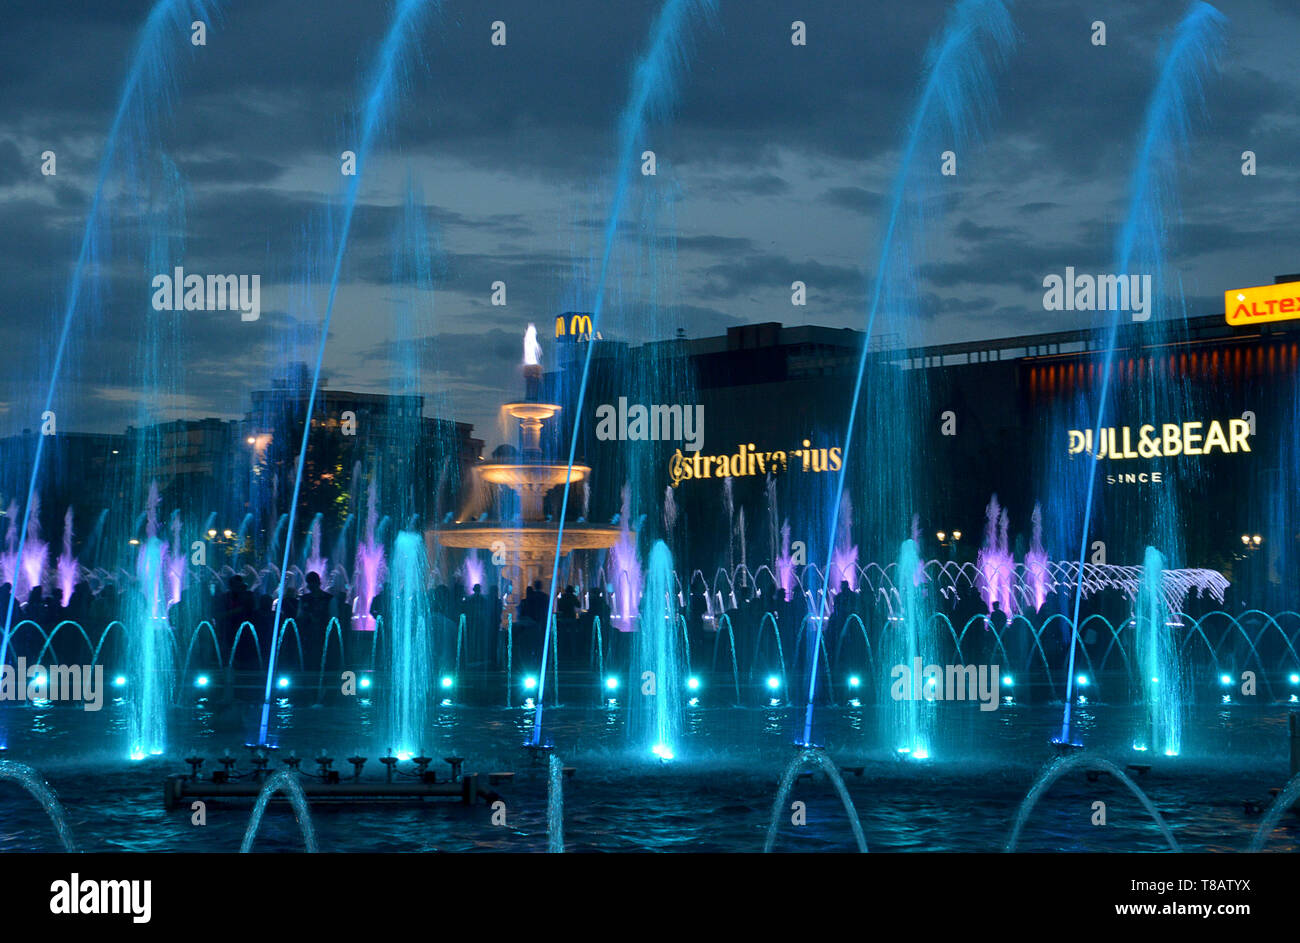 BUCHAREST, ROMANIA - 11 MAY 2019: The second weekend of performances of Simfonia apei (Water symphony), a son et lumiere with the fountains at Piata Unirii. Stock Photo